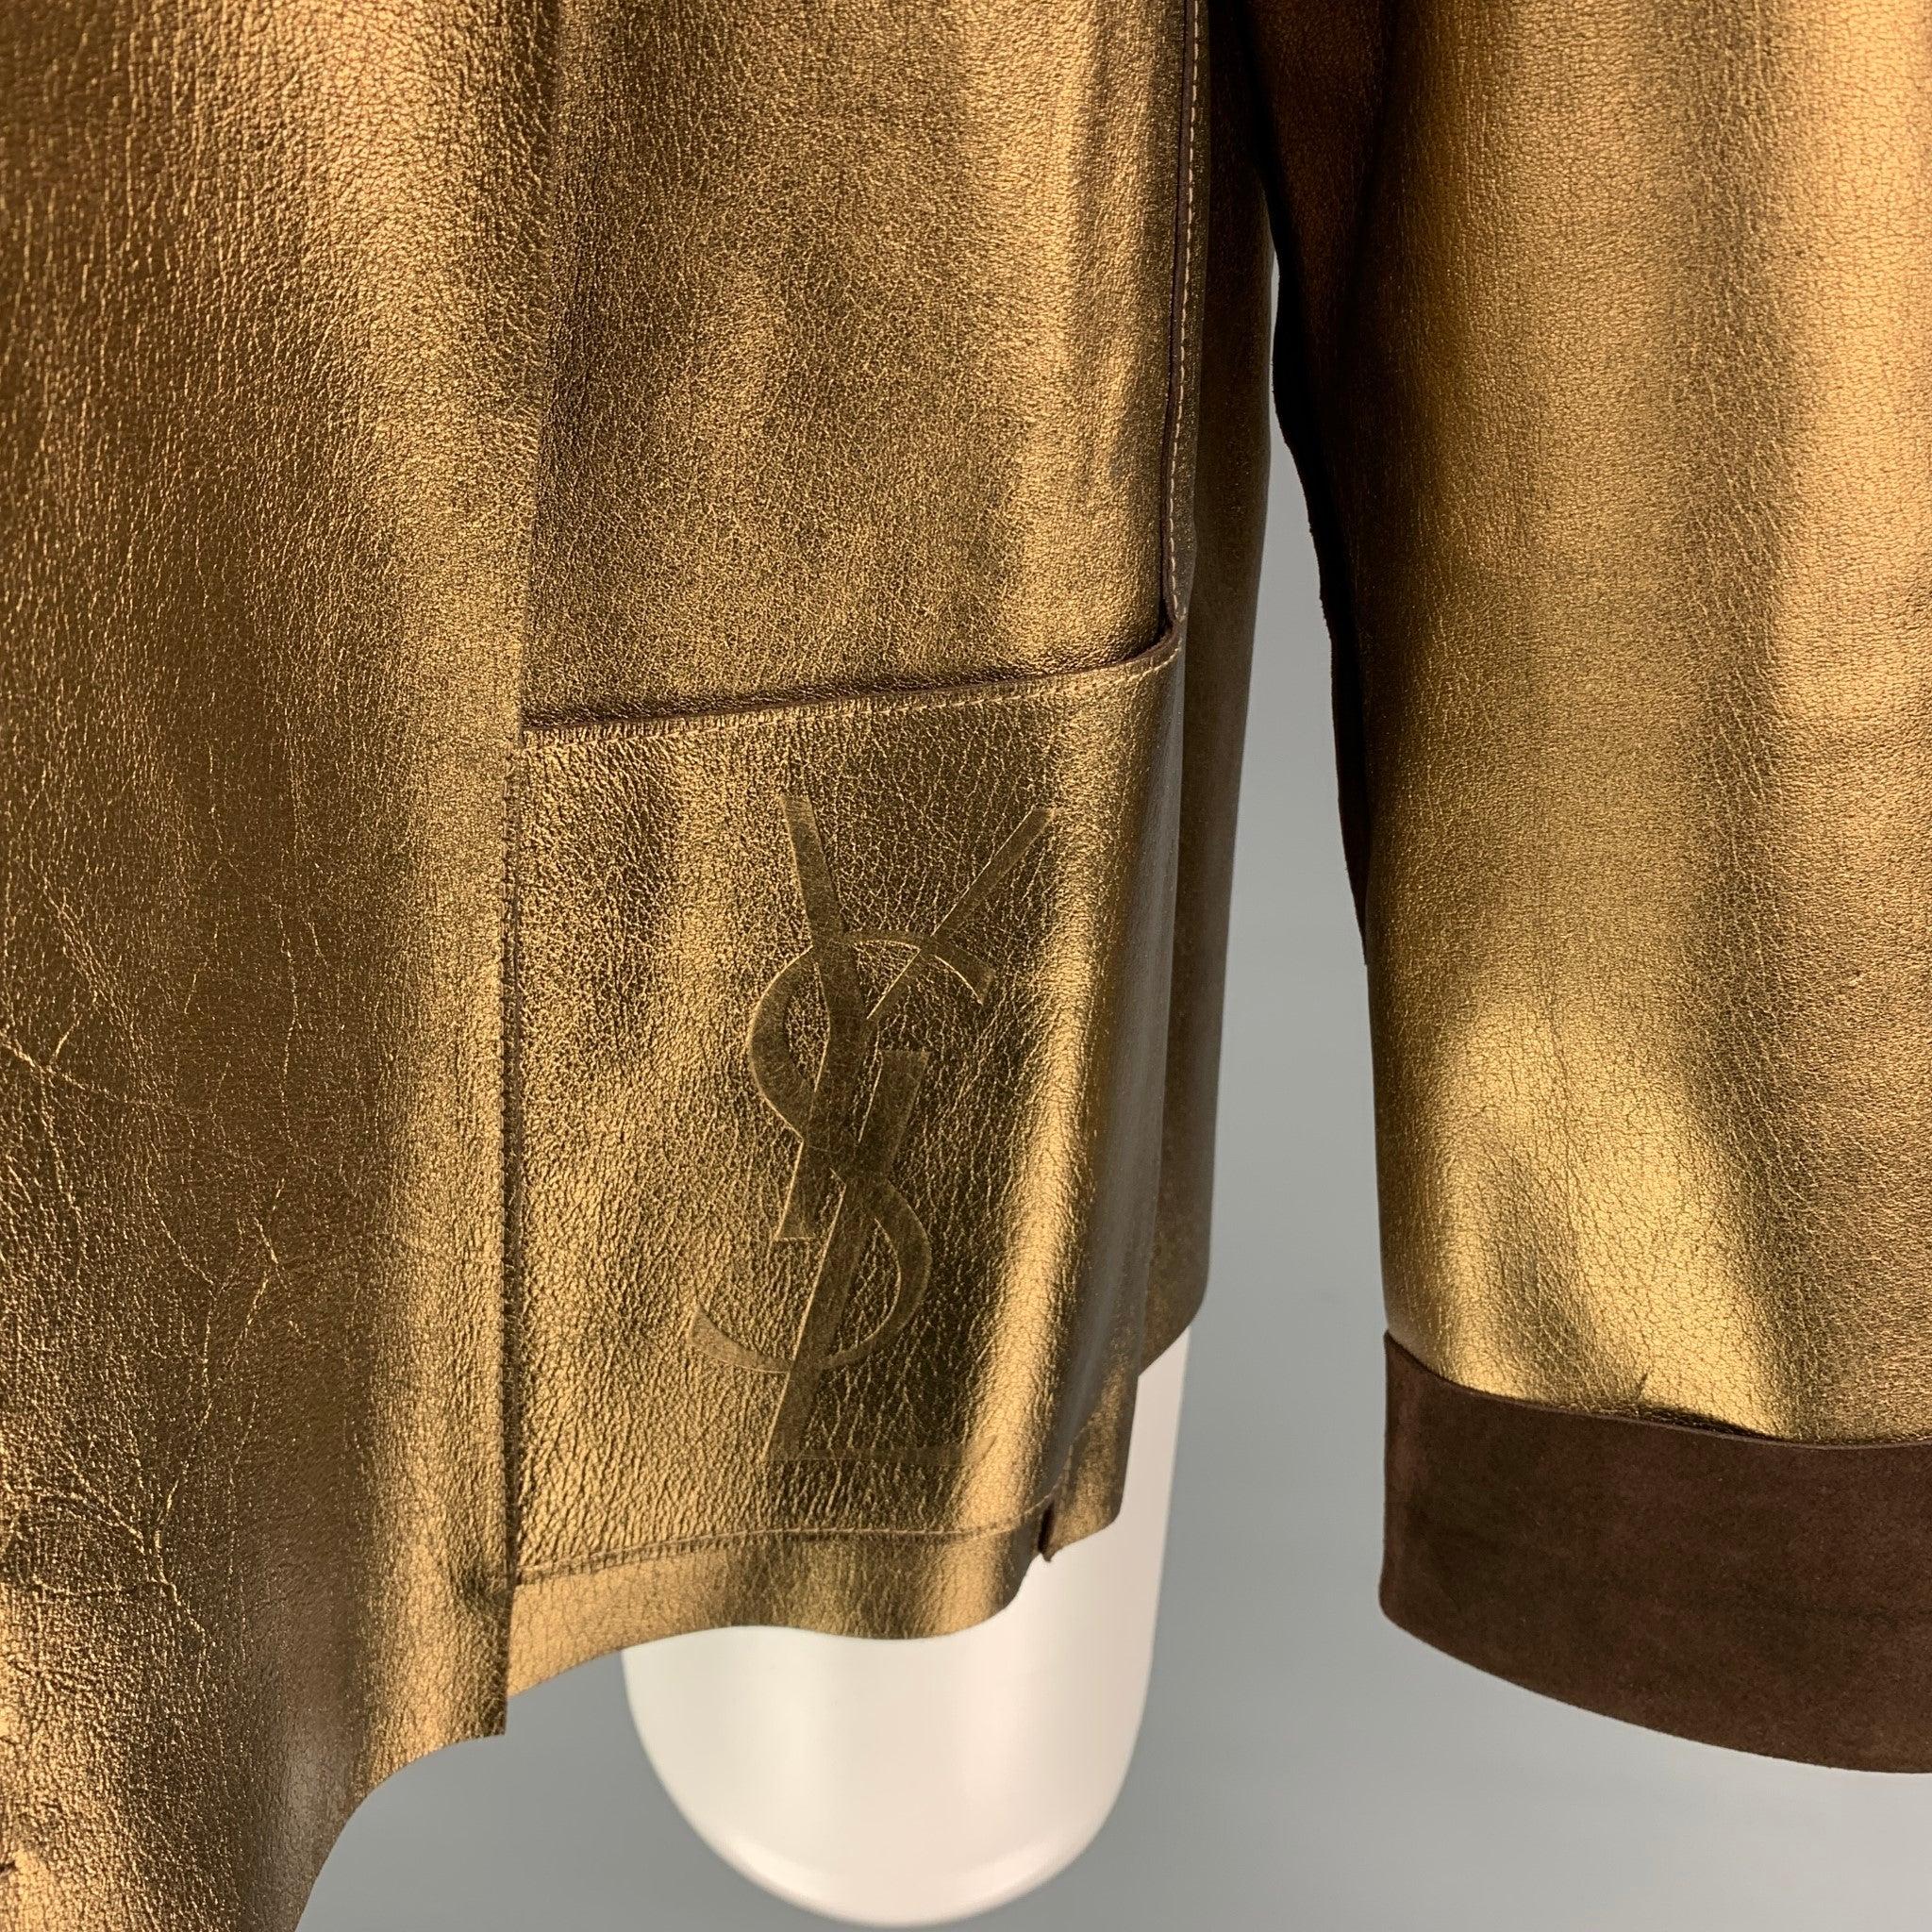 YVES SAINT LAUREN by TOM FORD jacket comes in a gold & brown leather featuring a reversible style, raw edges, 